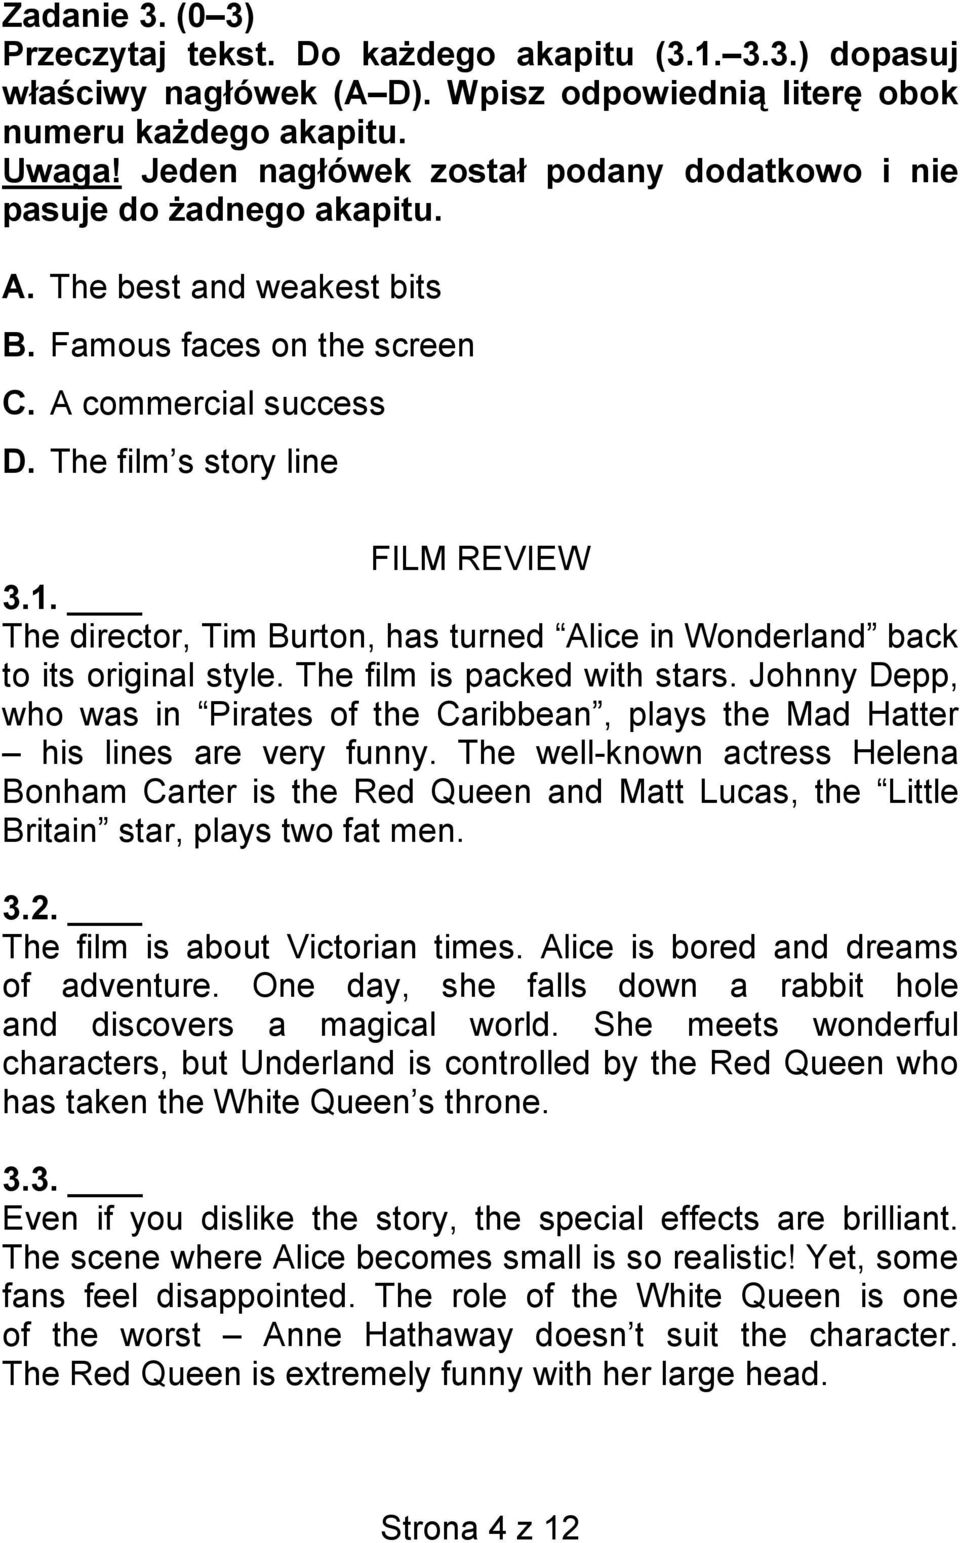 The director, Tim Burton, has turned Alice in Wonderland back to its original style. The film is packed with stars.